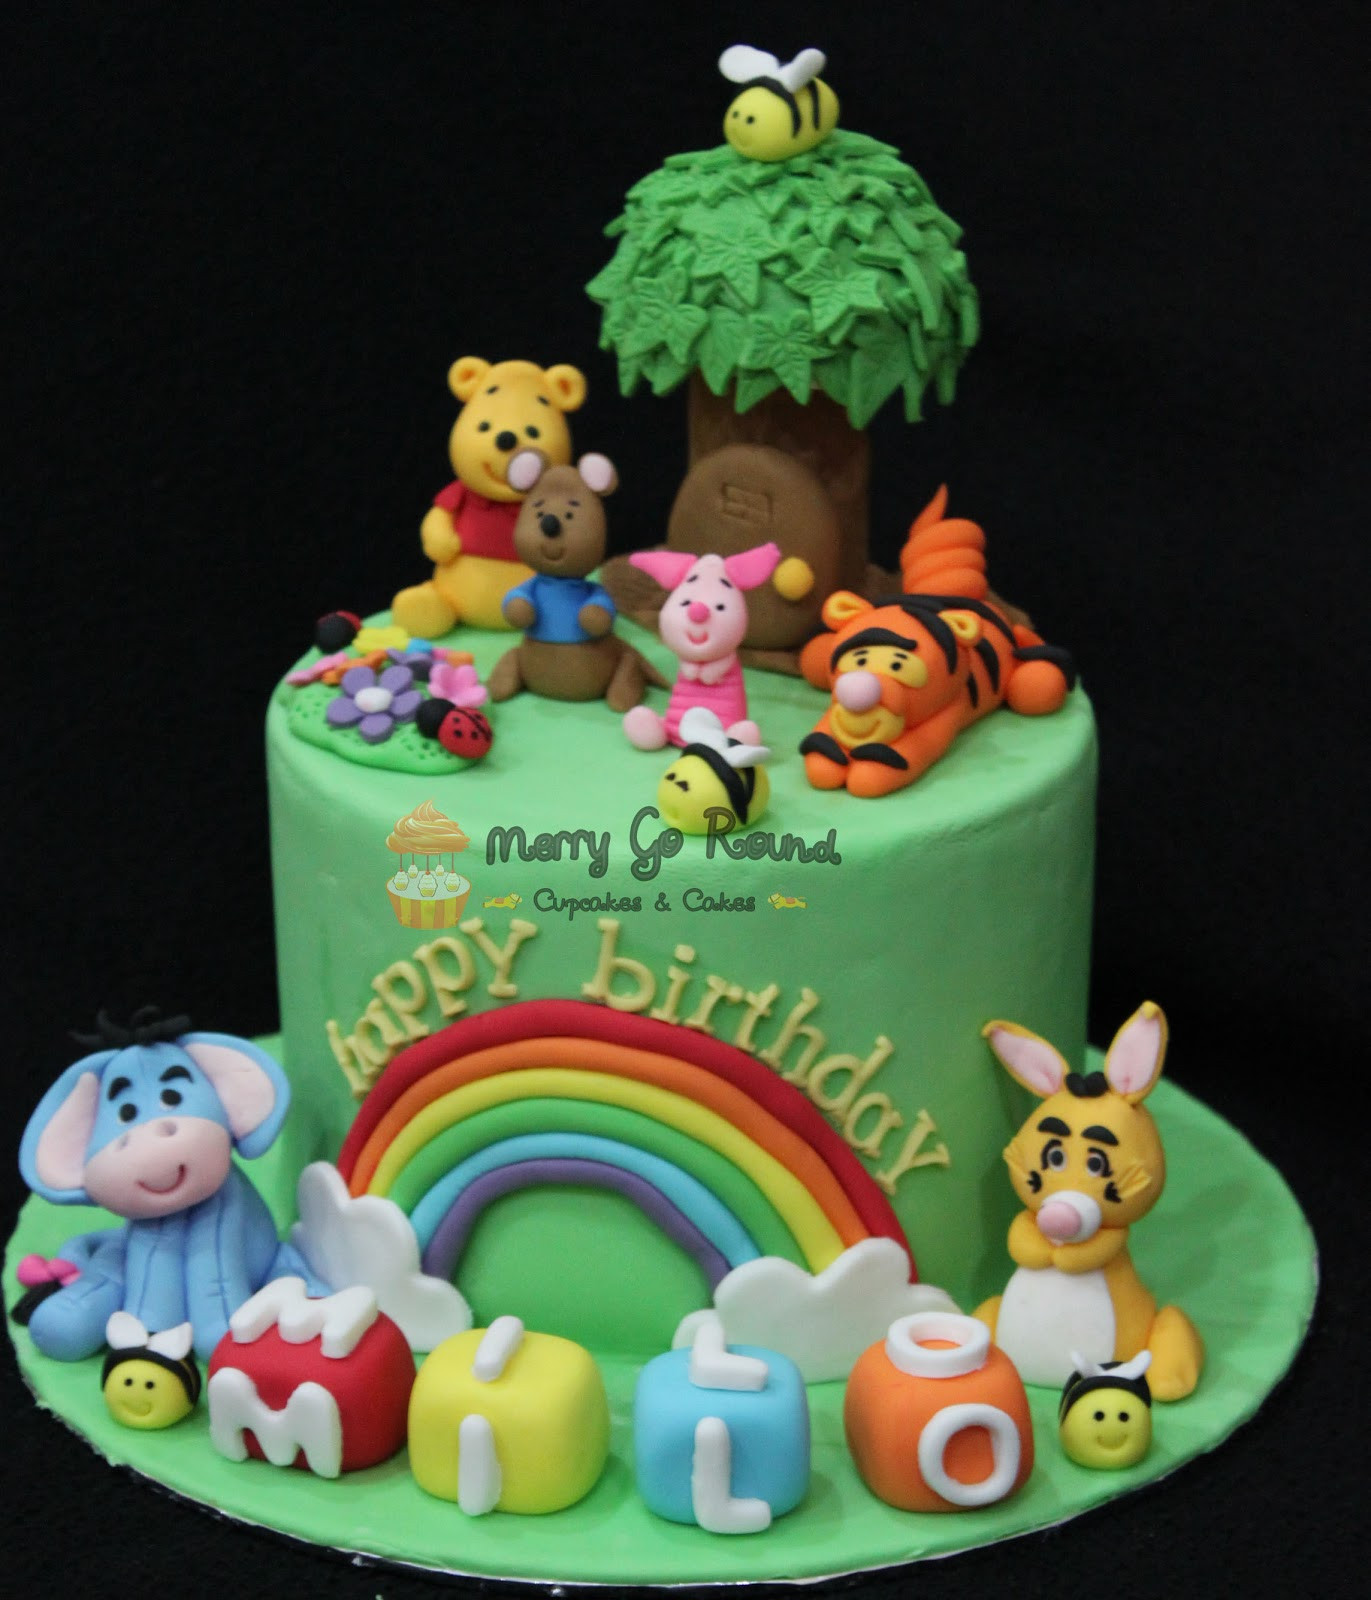 Best ideas about Winnie The Pooh Birthday Cake
. Save or Pin Merry Go Round Cupcakes & Cakes Winnie The Pooh Now.